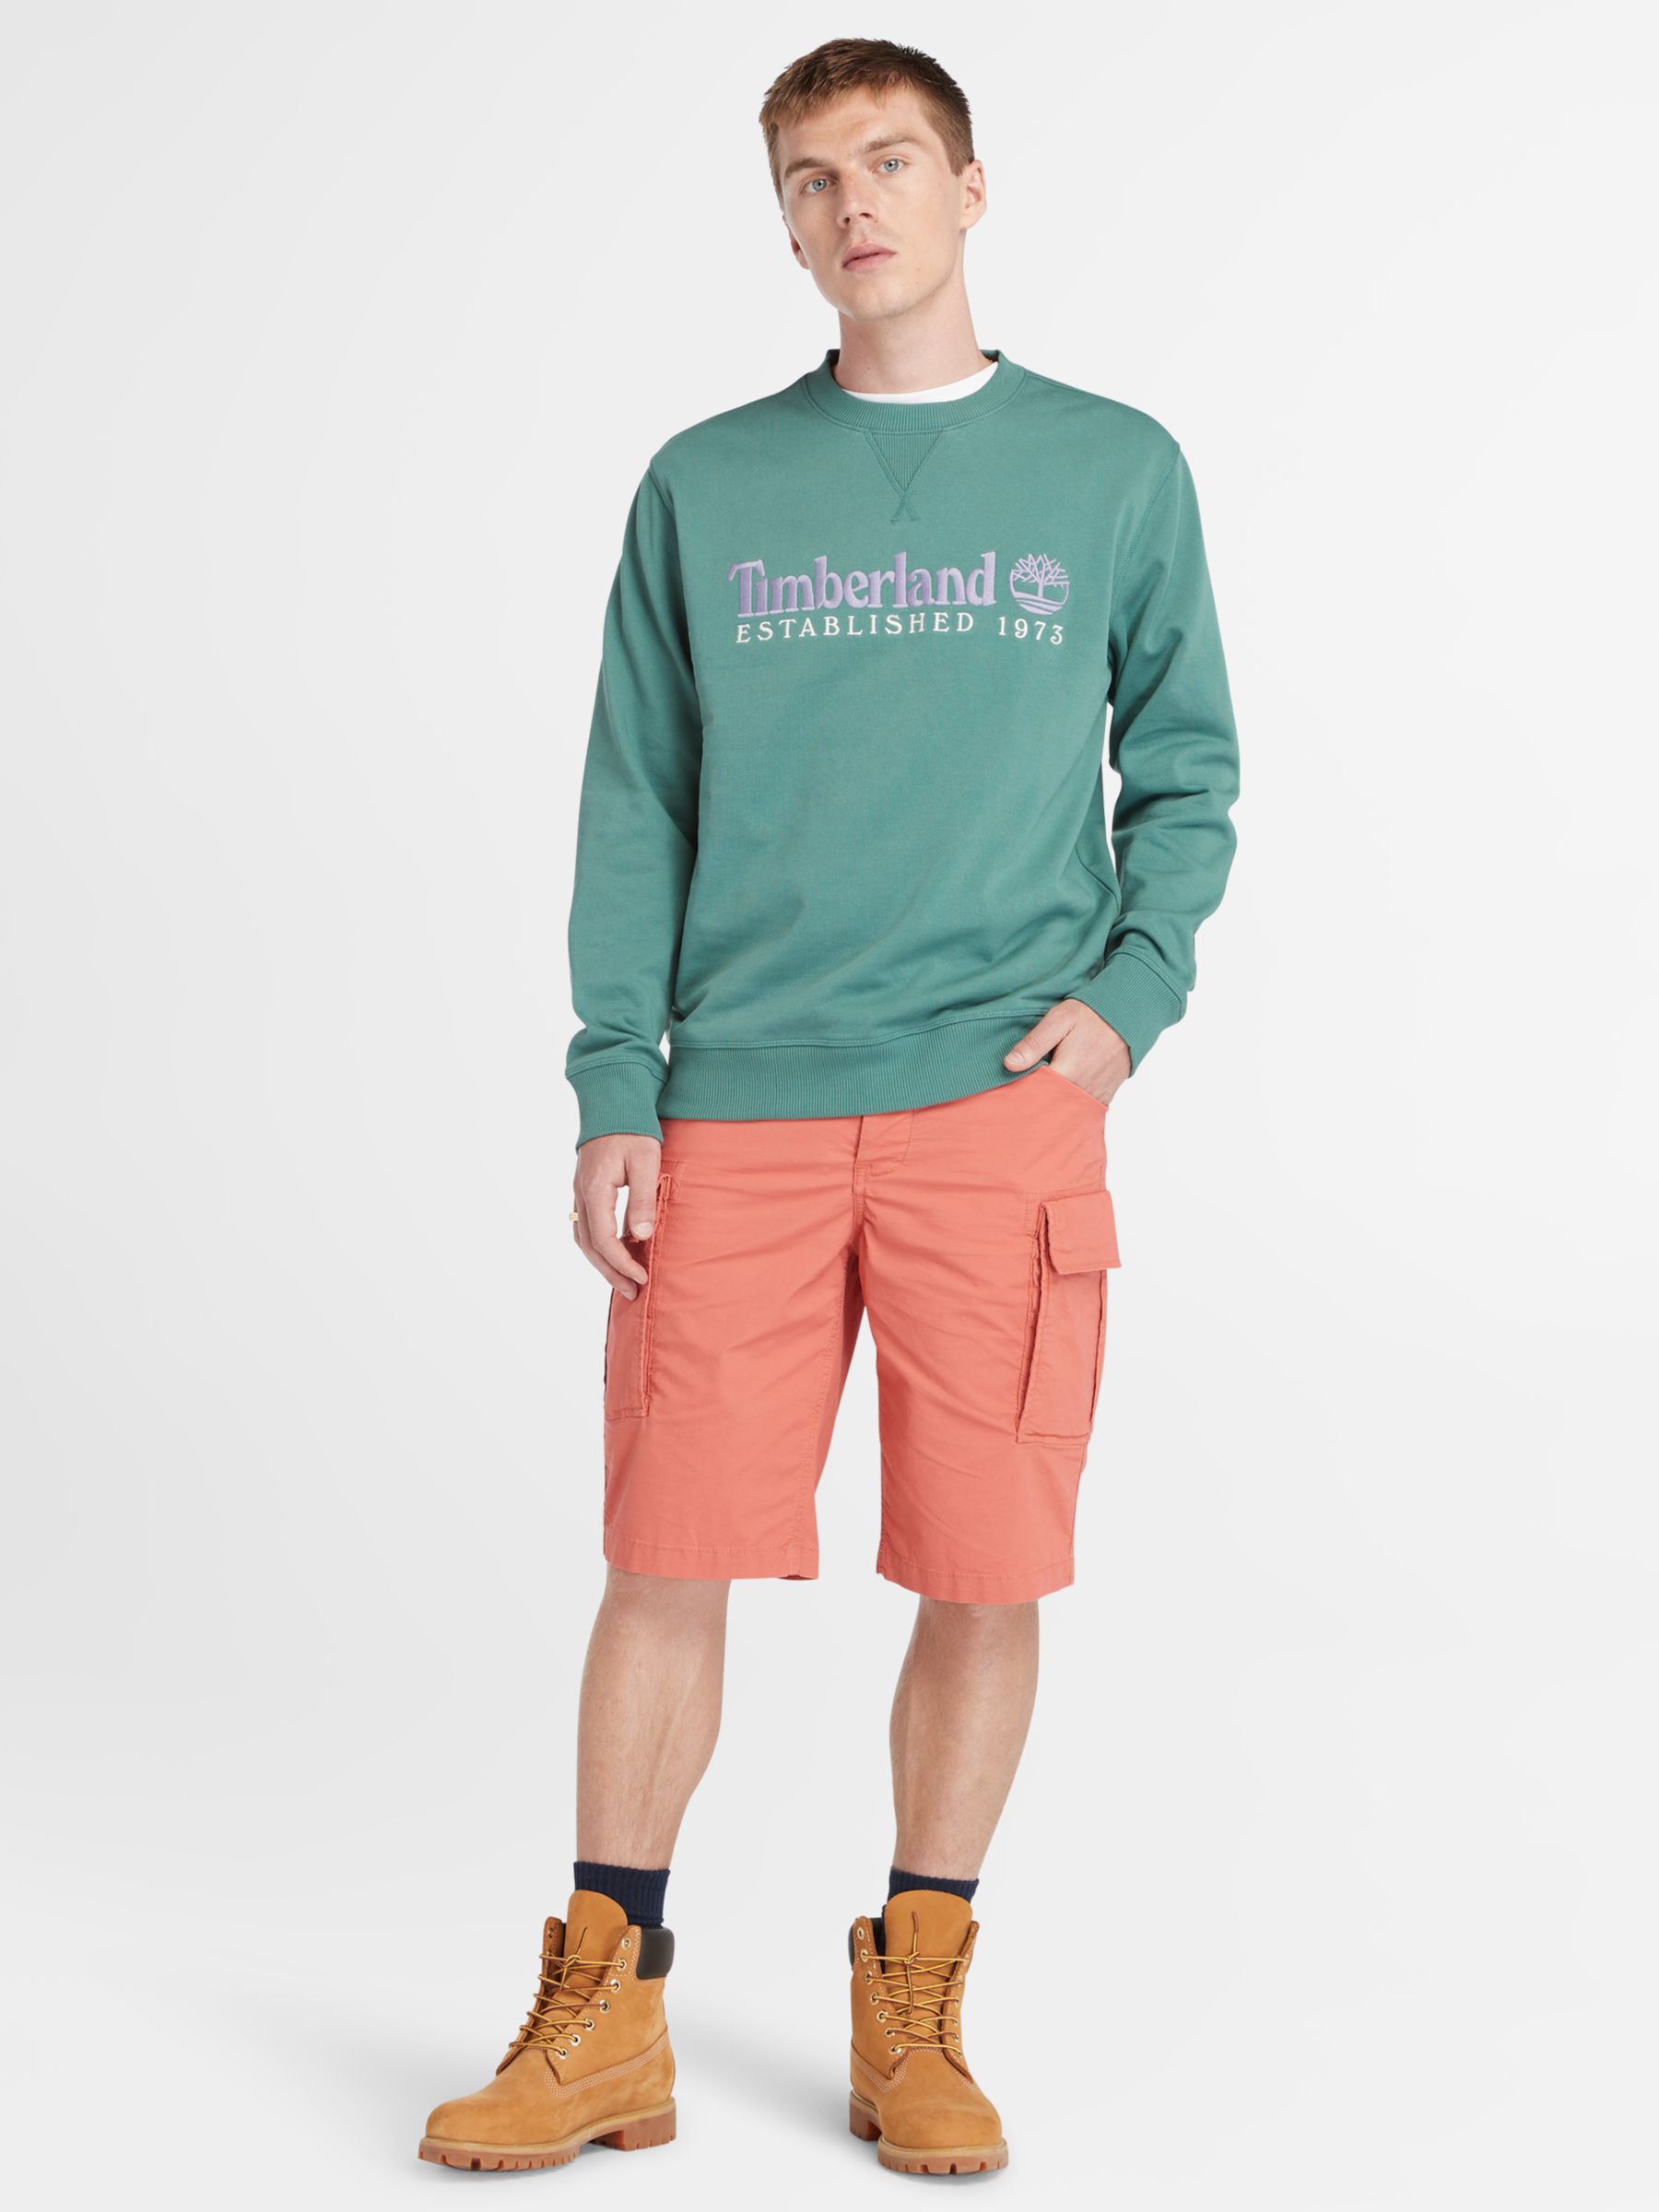 Buy Timberland Embroidered Logo Crew Jumper, Green Online at johnlewis.com